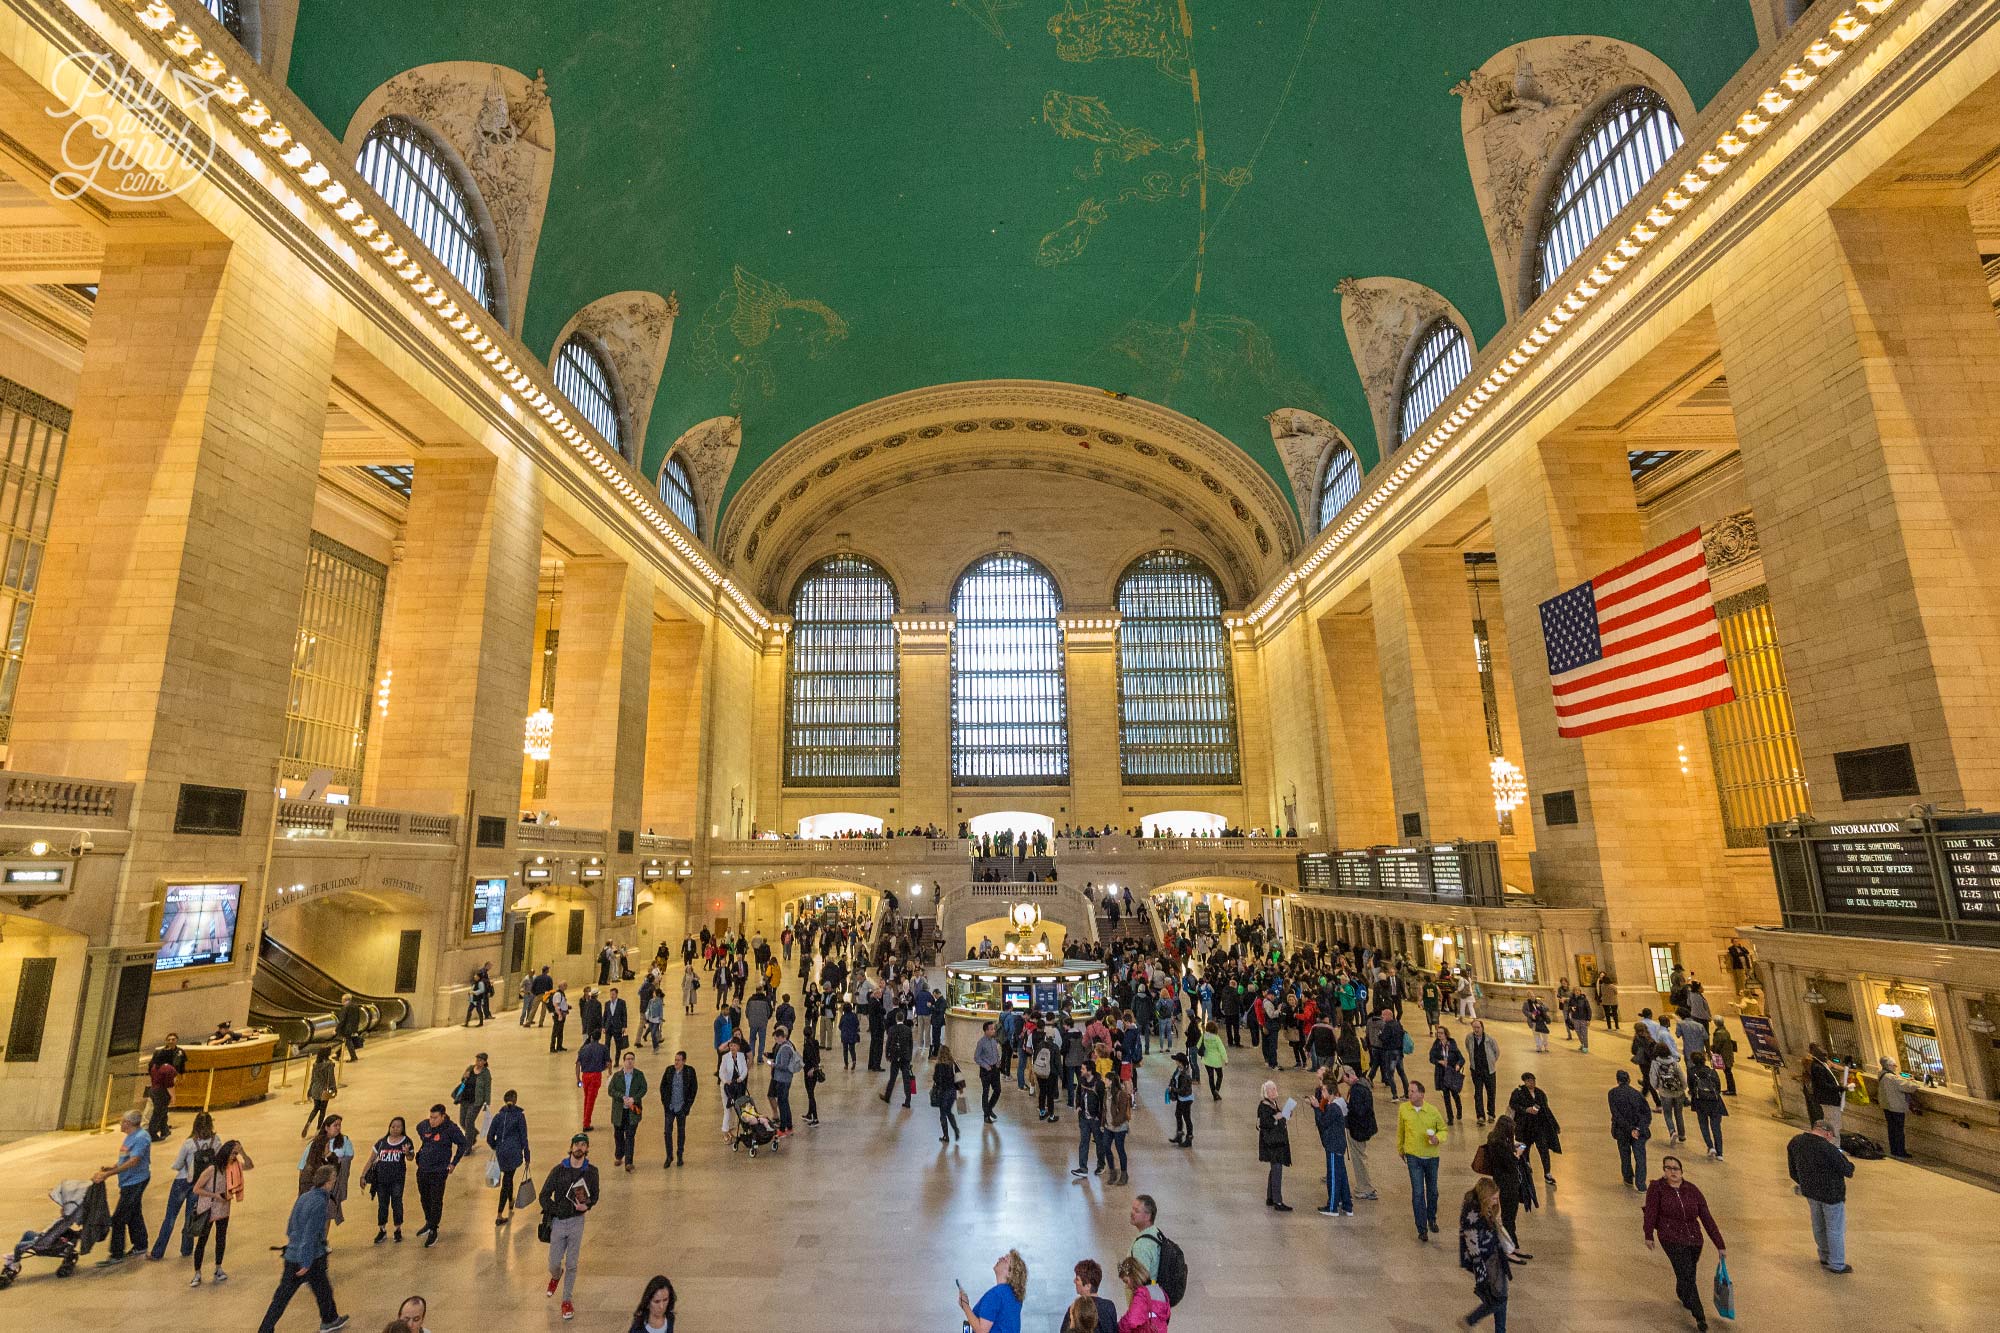 The beauty that is Grand Central Station